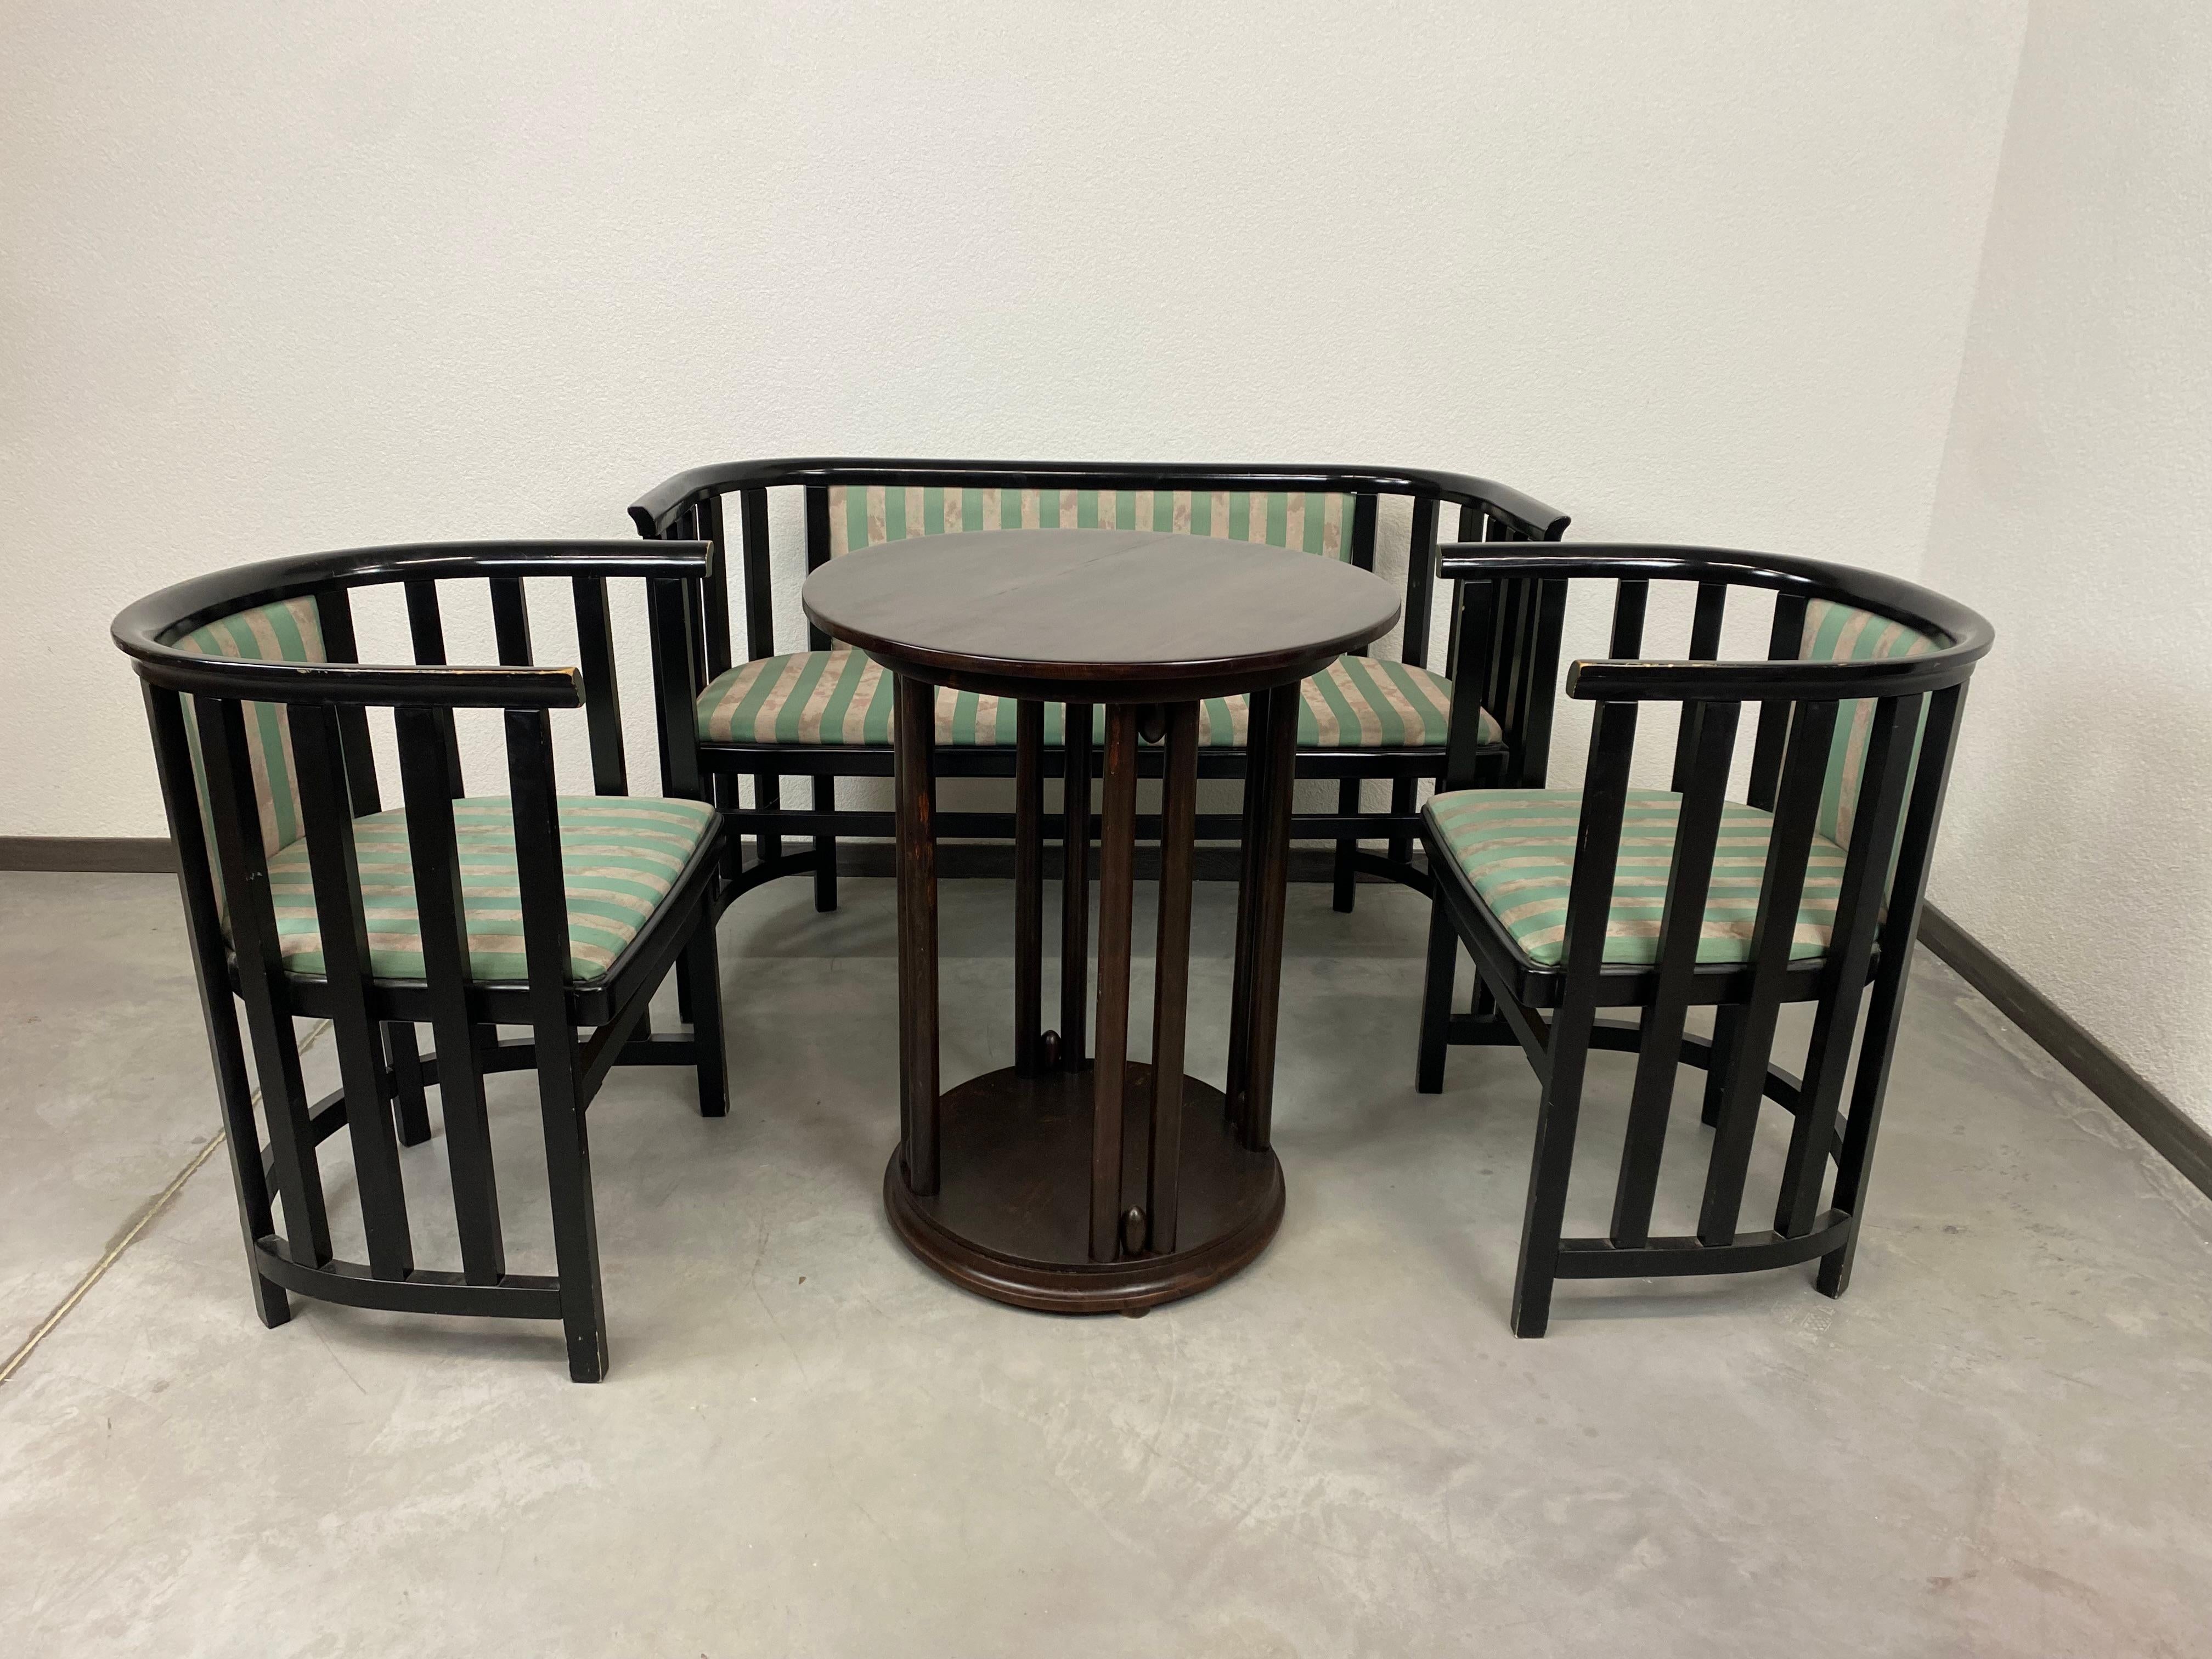 Fledermaus seating group by Josef Hoffmann ex. by Wittmann Wien circa 1950. Original vintage condition with signs of use. Sofa: wxdxh 119x50x74 seat height 44cm Armchair: wxdxh 56x50x74 seat height 44cm.